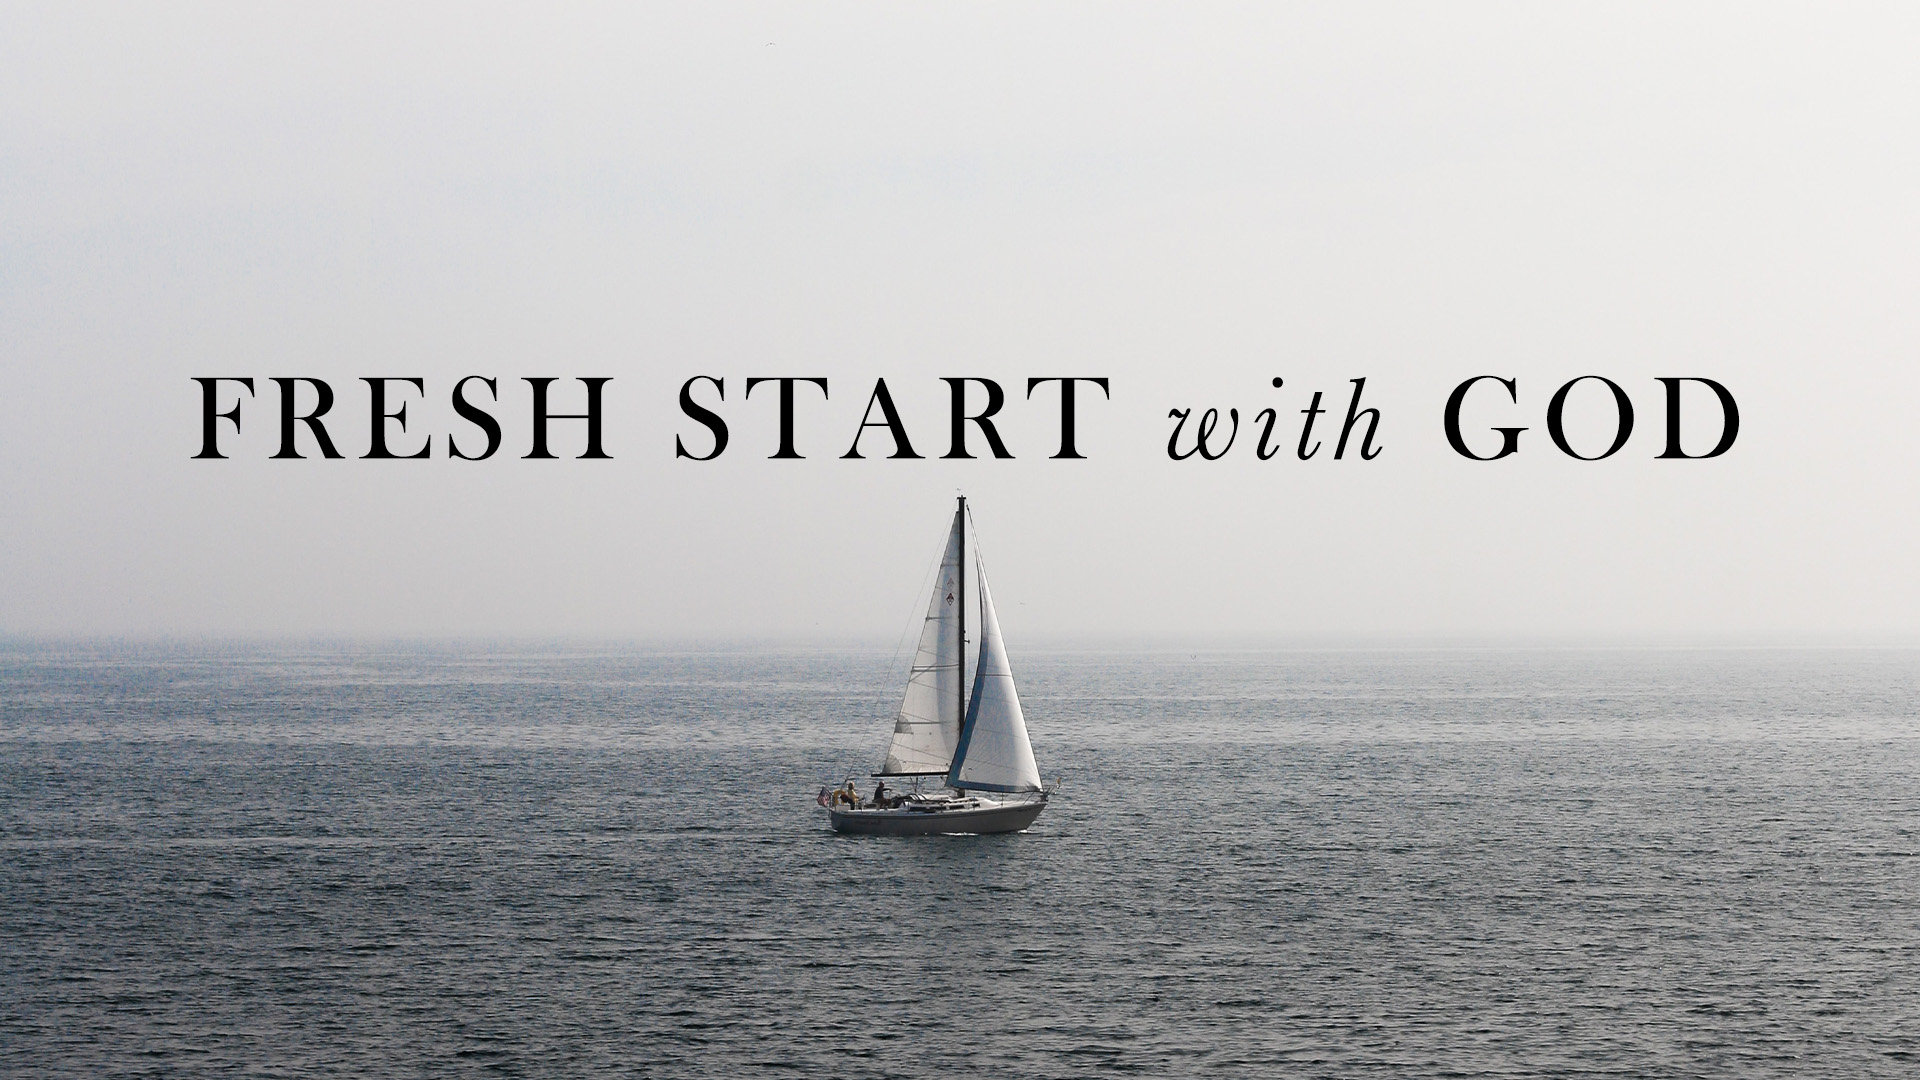 Fresh Start with God

Sunday | 9:00am
Next class date to be determined
